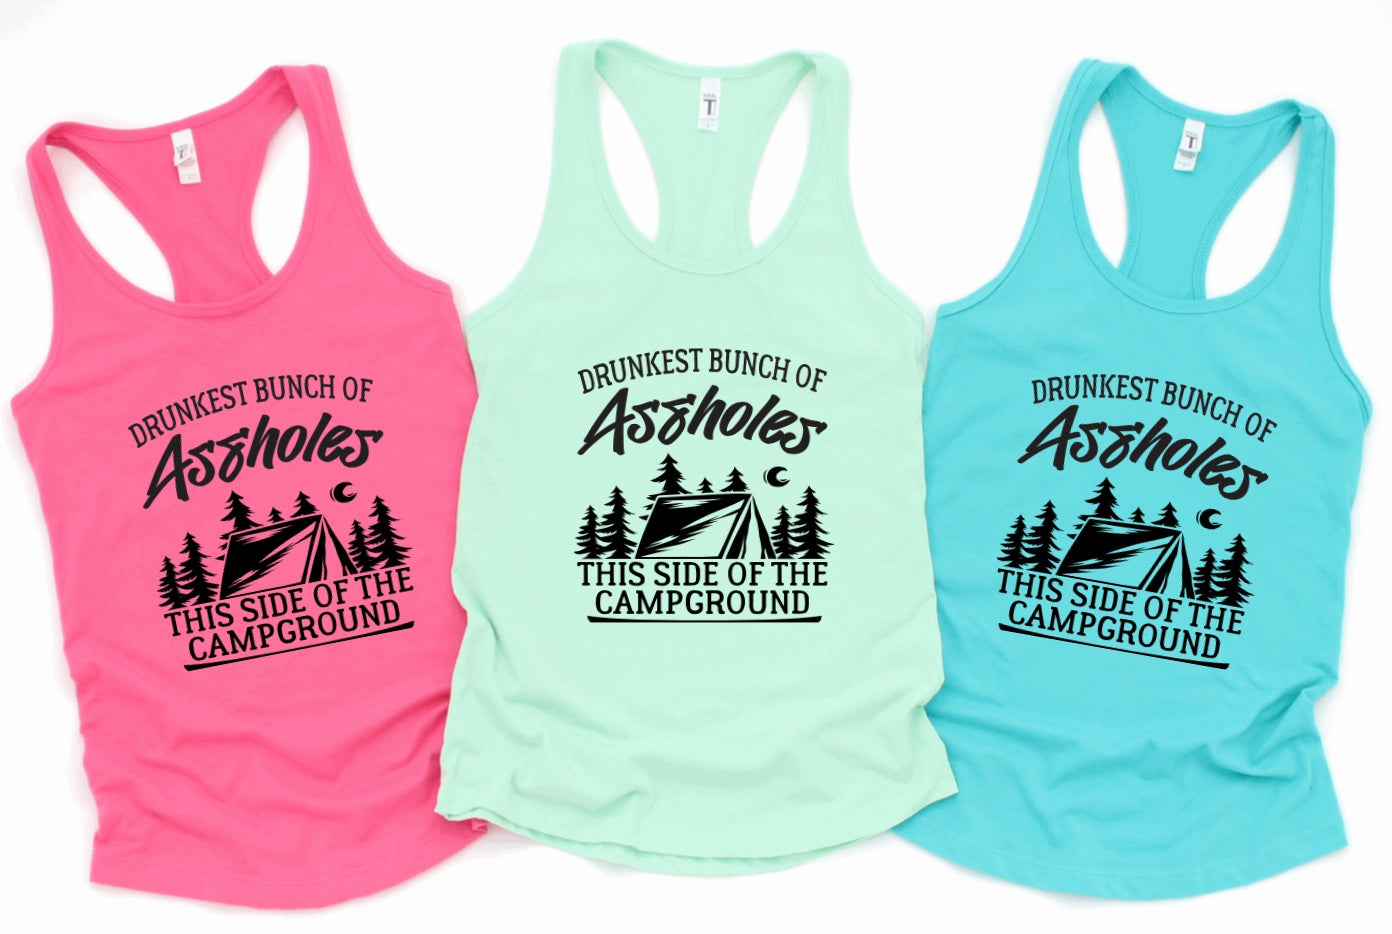 Drunkest bunch of assholes this side of the campground racerback tank tops 